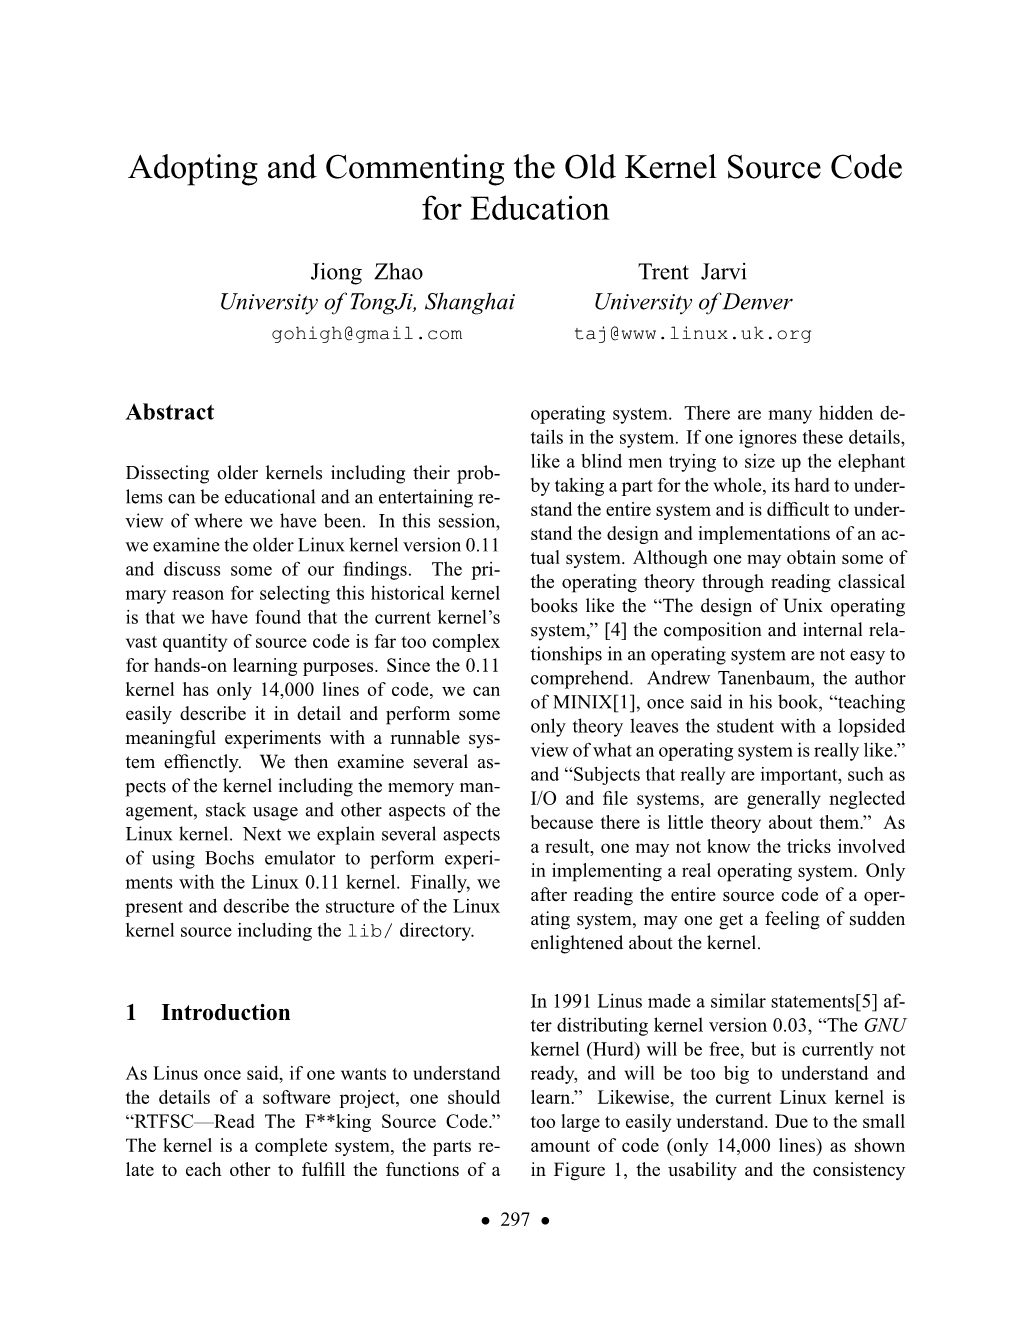 Adopting and Commenting the Old Kernel Source Code for Education